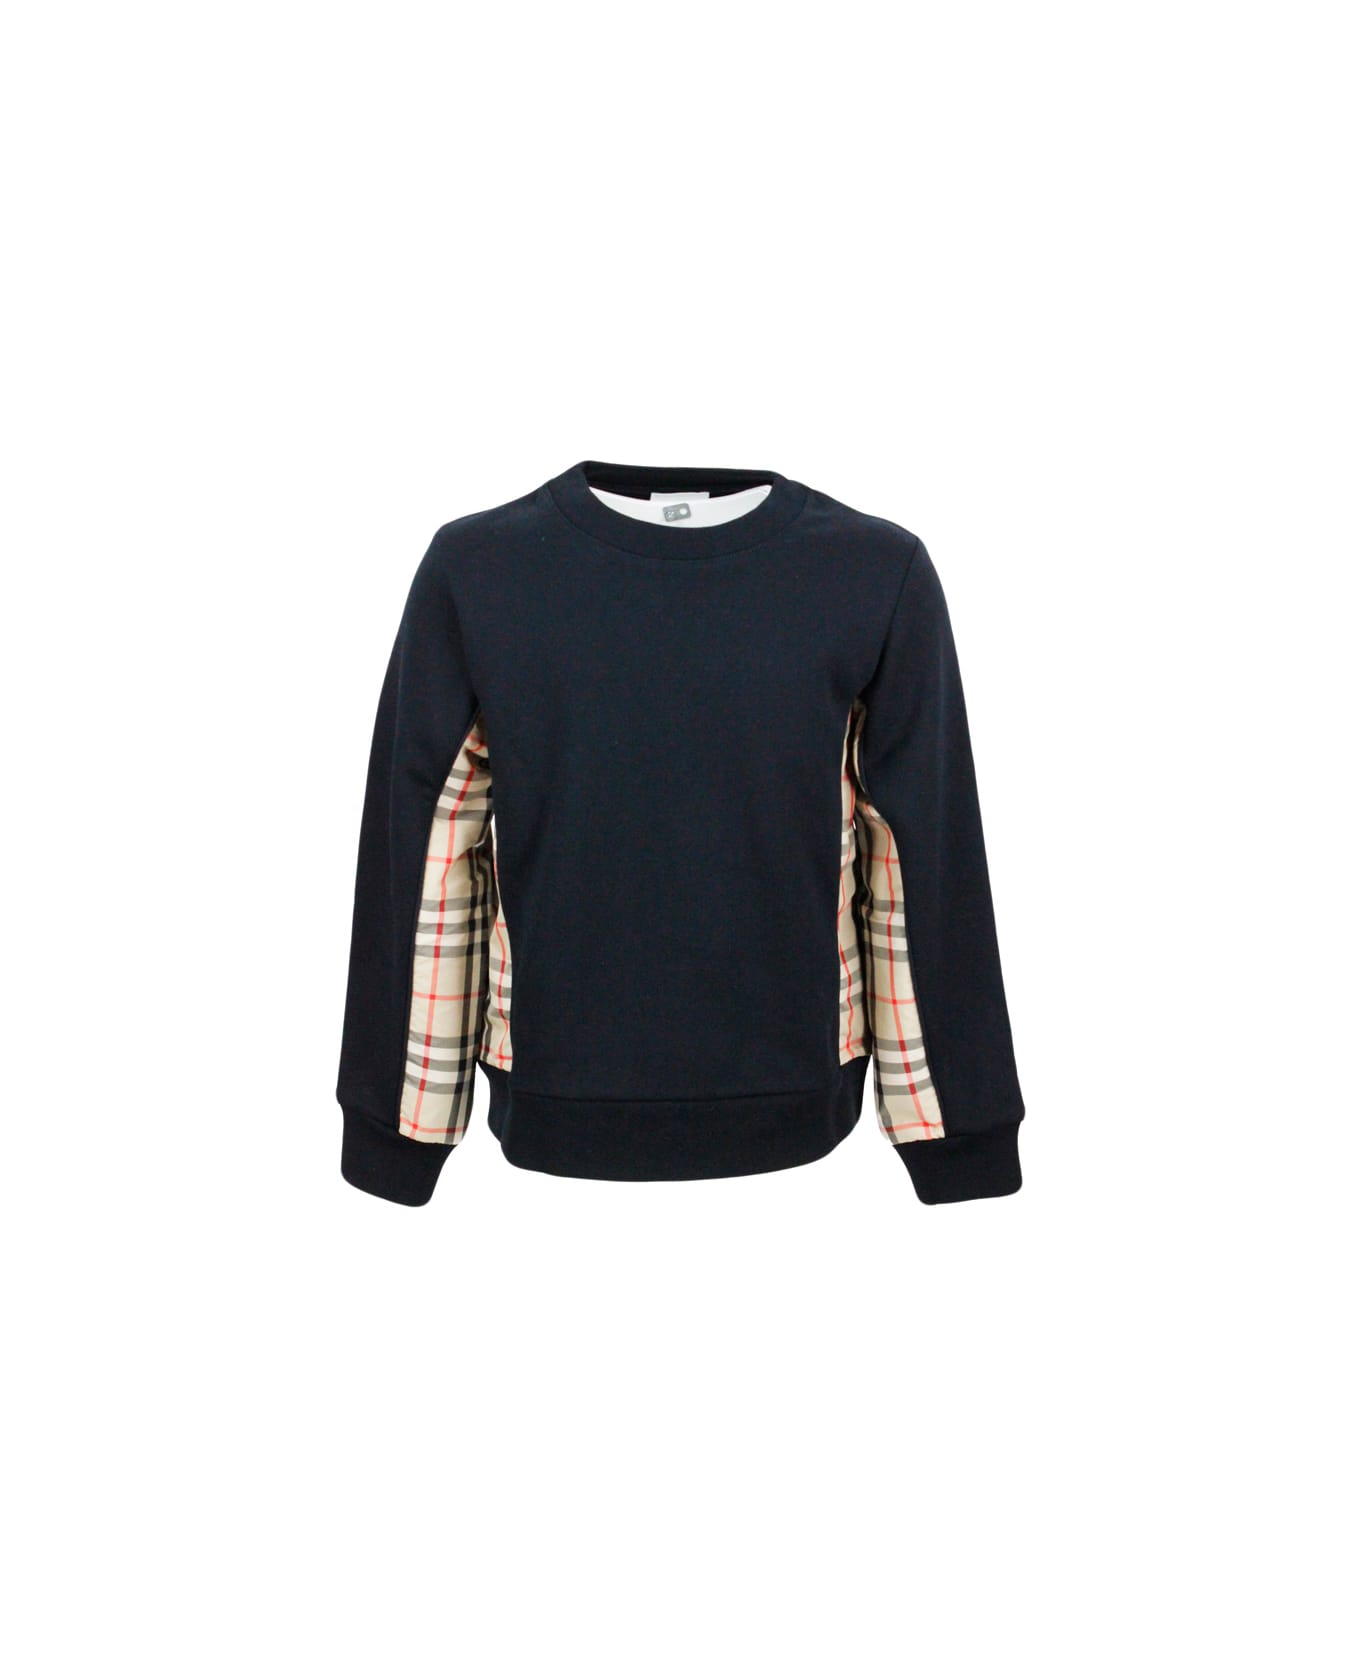 Burberry Crewneck Sweatshirt In Cotton And Check On The Sides. - Black